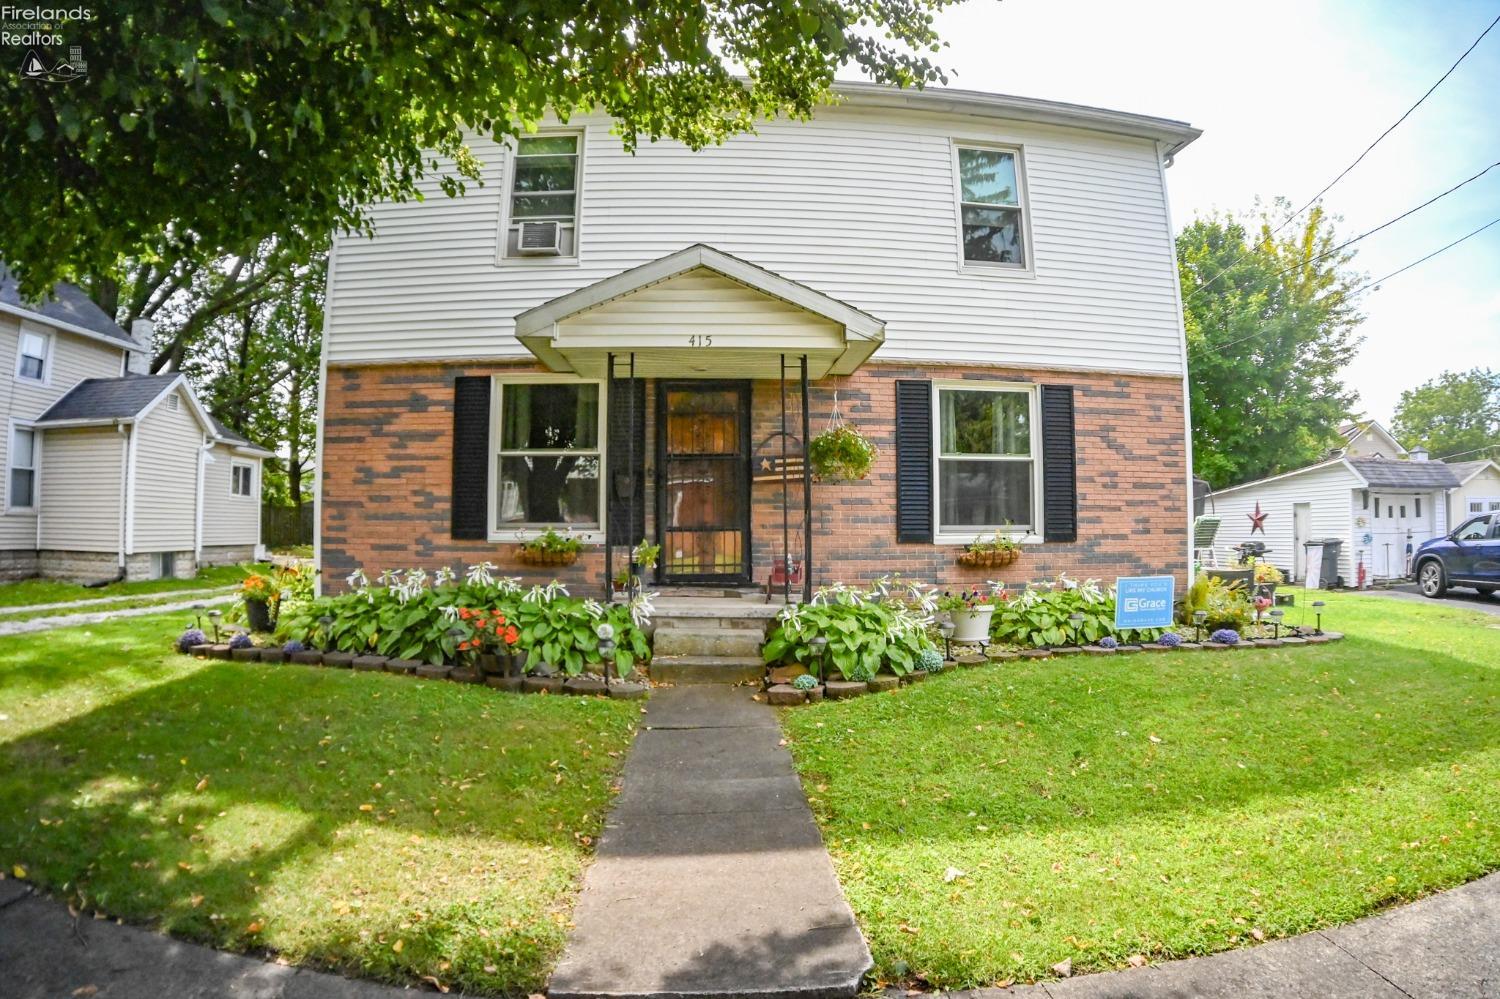 415 George Street, Clyde, OH 43410